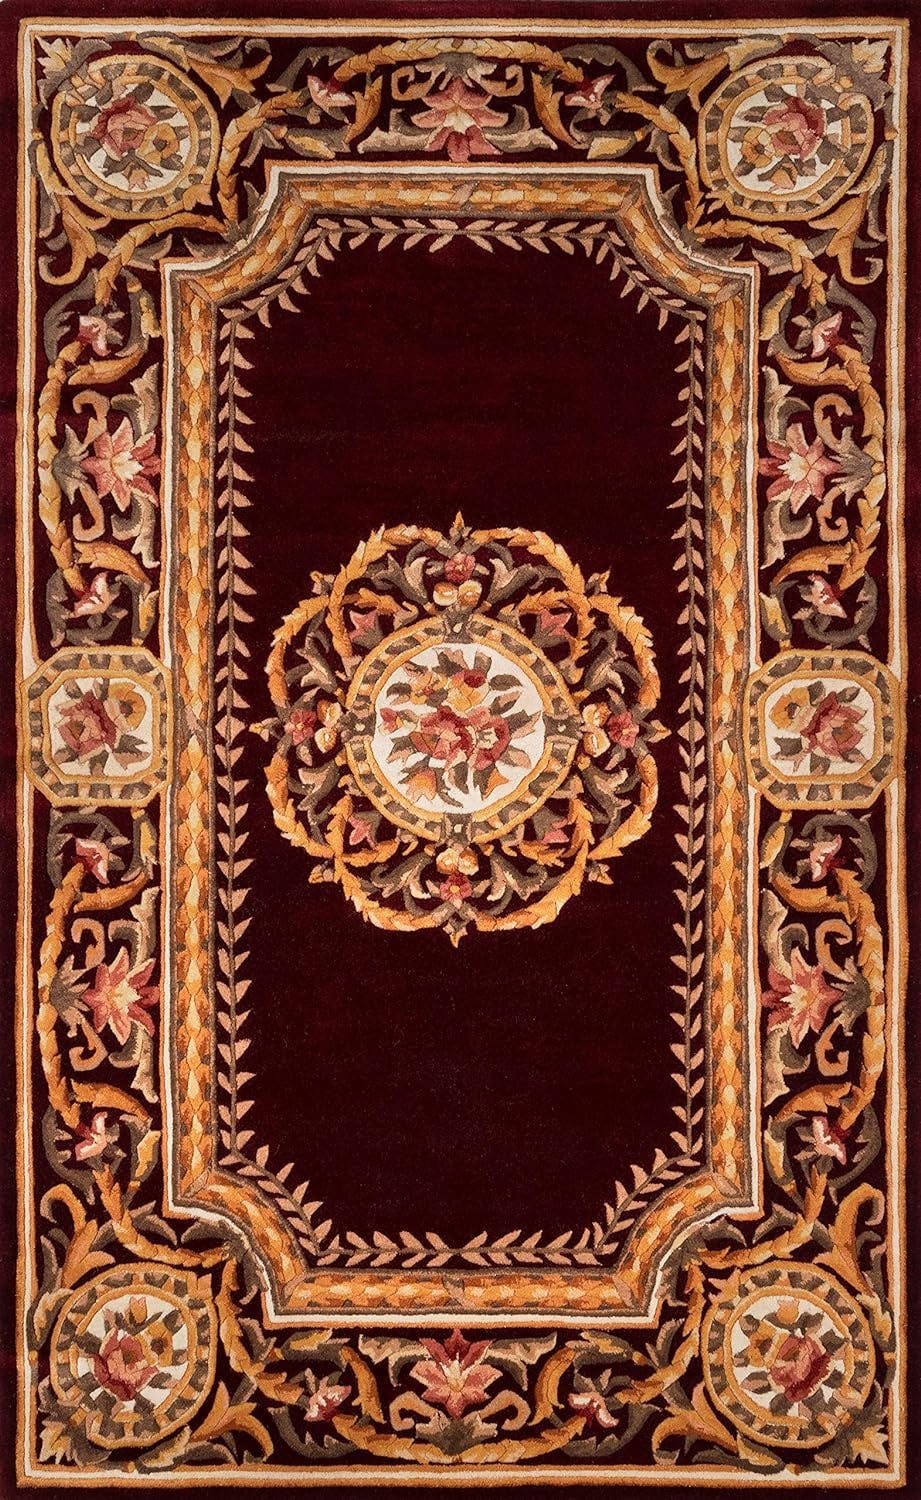 Regal Burgundy Hand-Tufted Wool Rug with Gold Floral Scrolls 8' x 11'